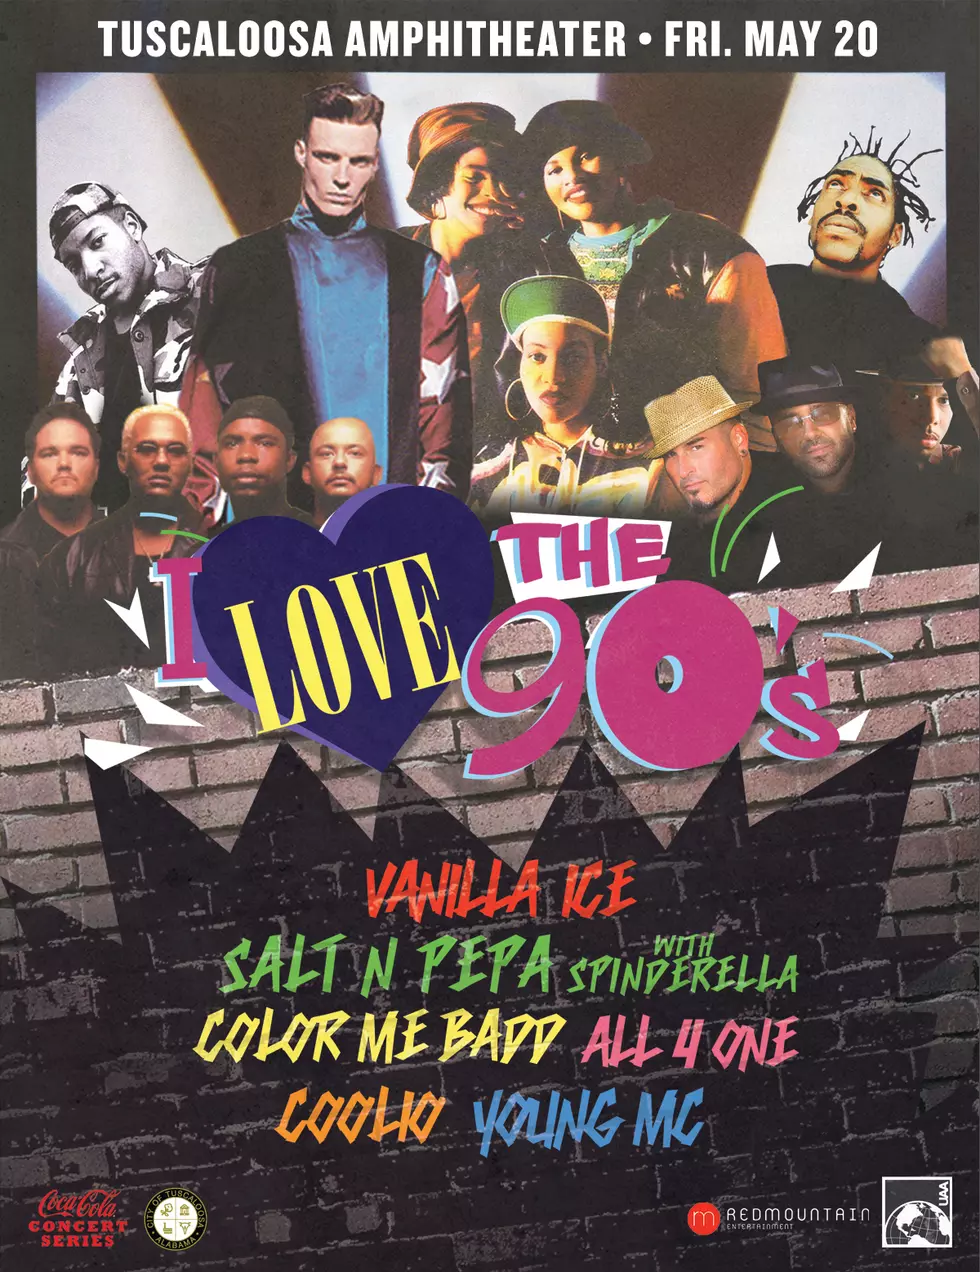 Get $20 Tickets on Friday for the I Love the 90s, Train and Other Tuscaloosa Amphitheater Concerts